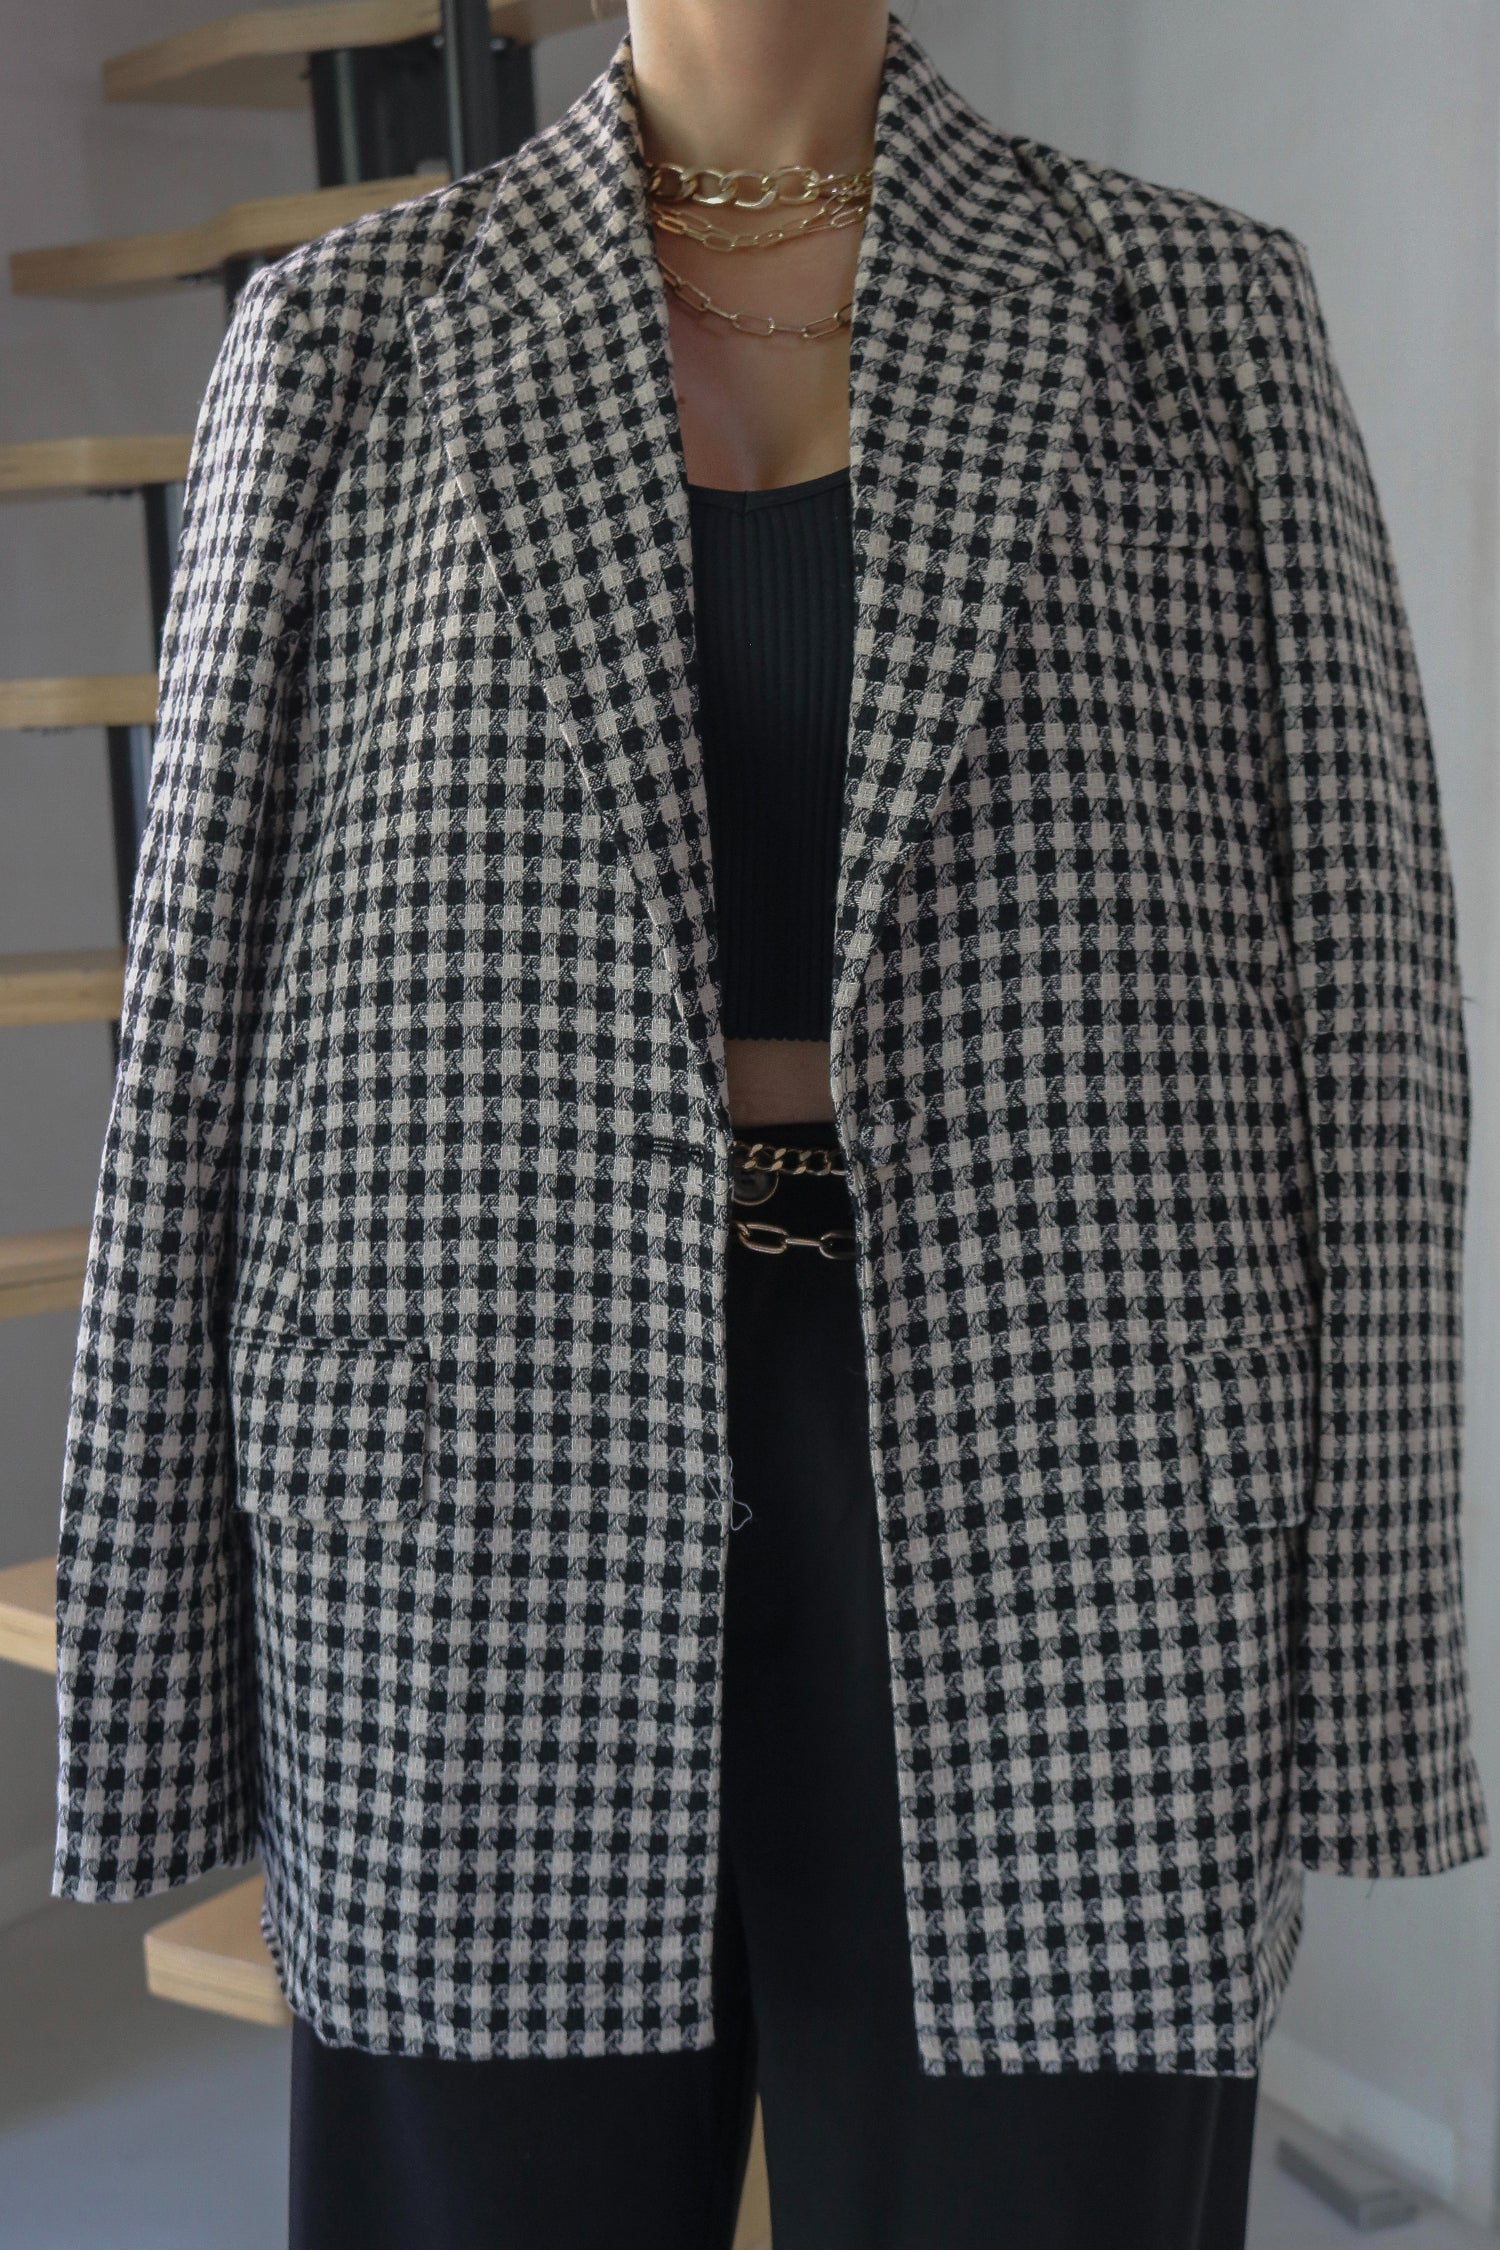 Oversized Vintage Checkered Gingham Blazer in Black and White, Scarlette The Label, an online fashion boutique for women.